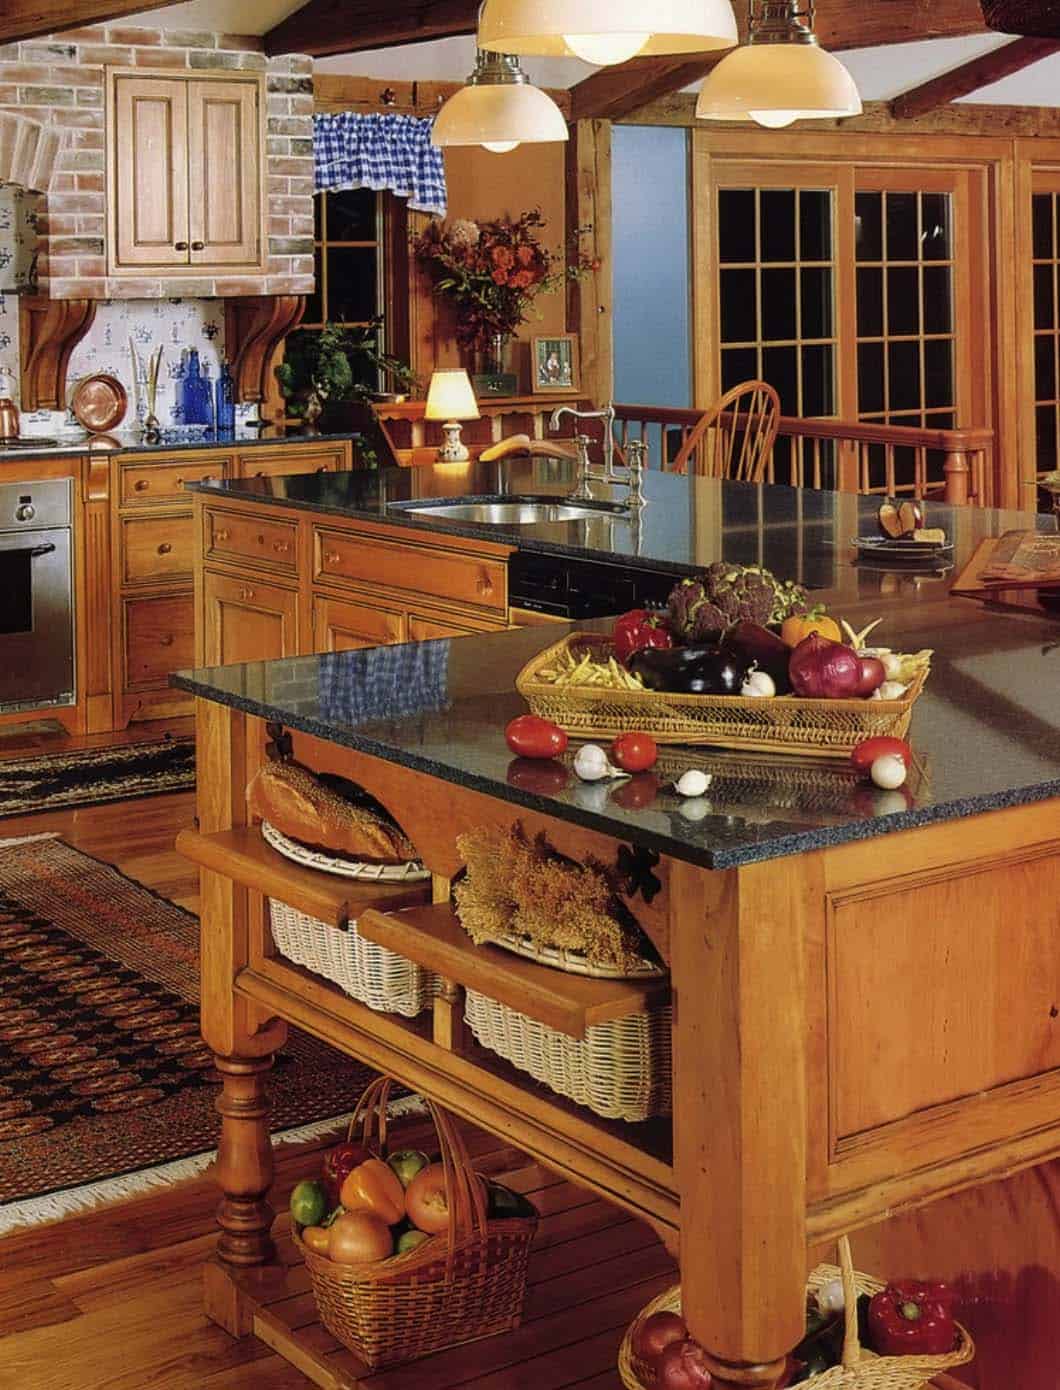 Countryside Kitchens: Rustic Decor Ideas For The Culinary Heart